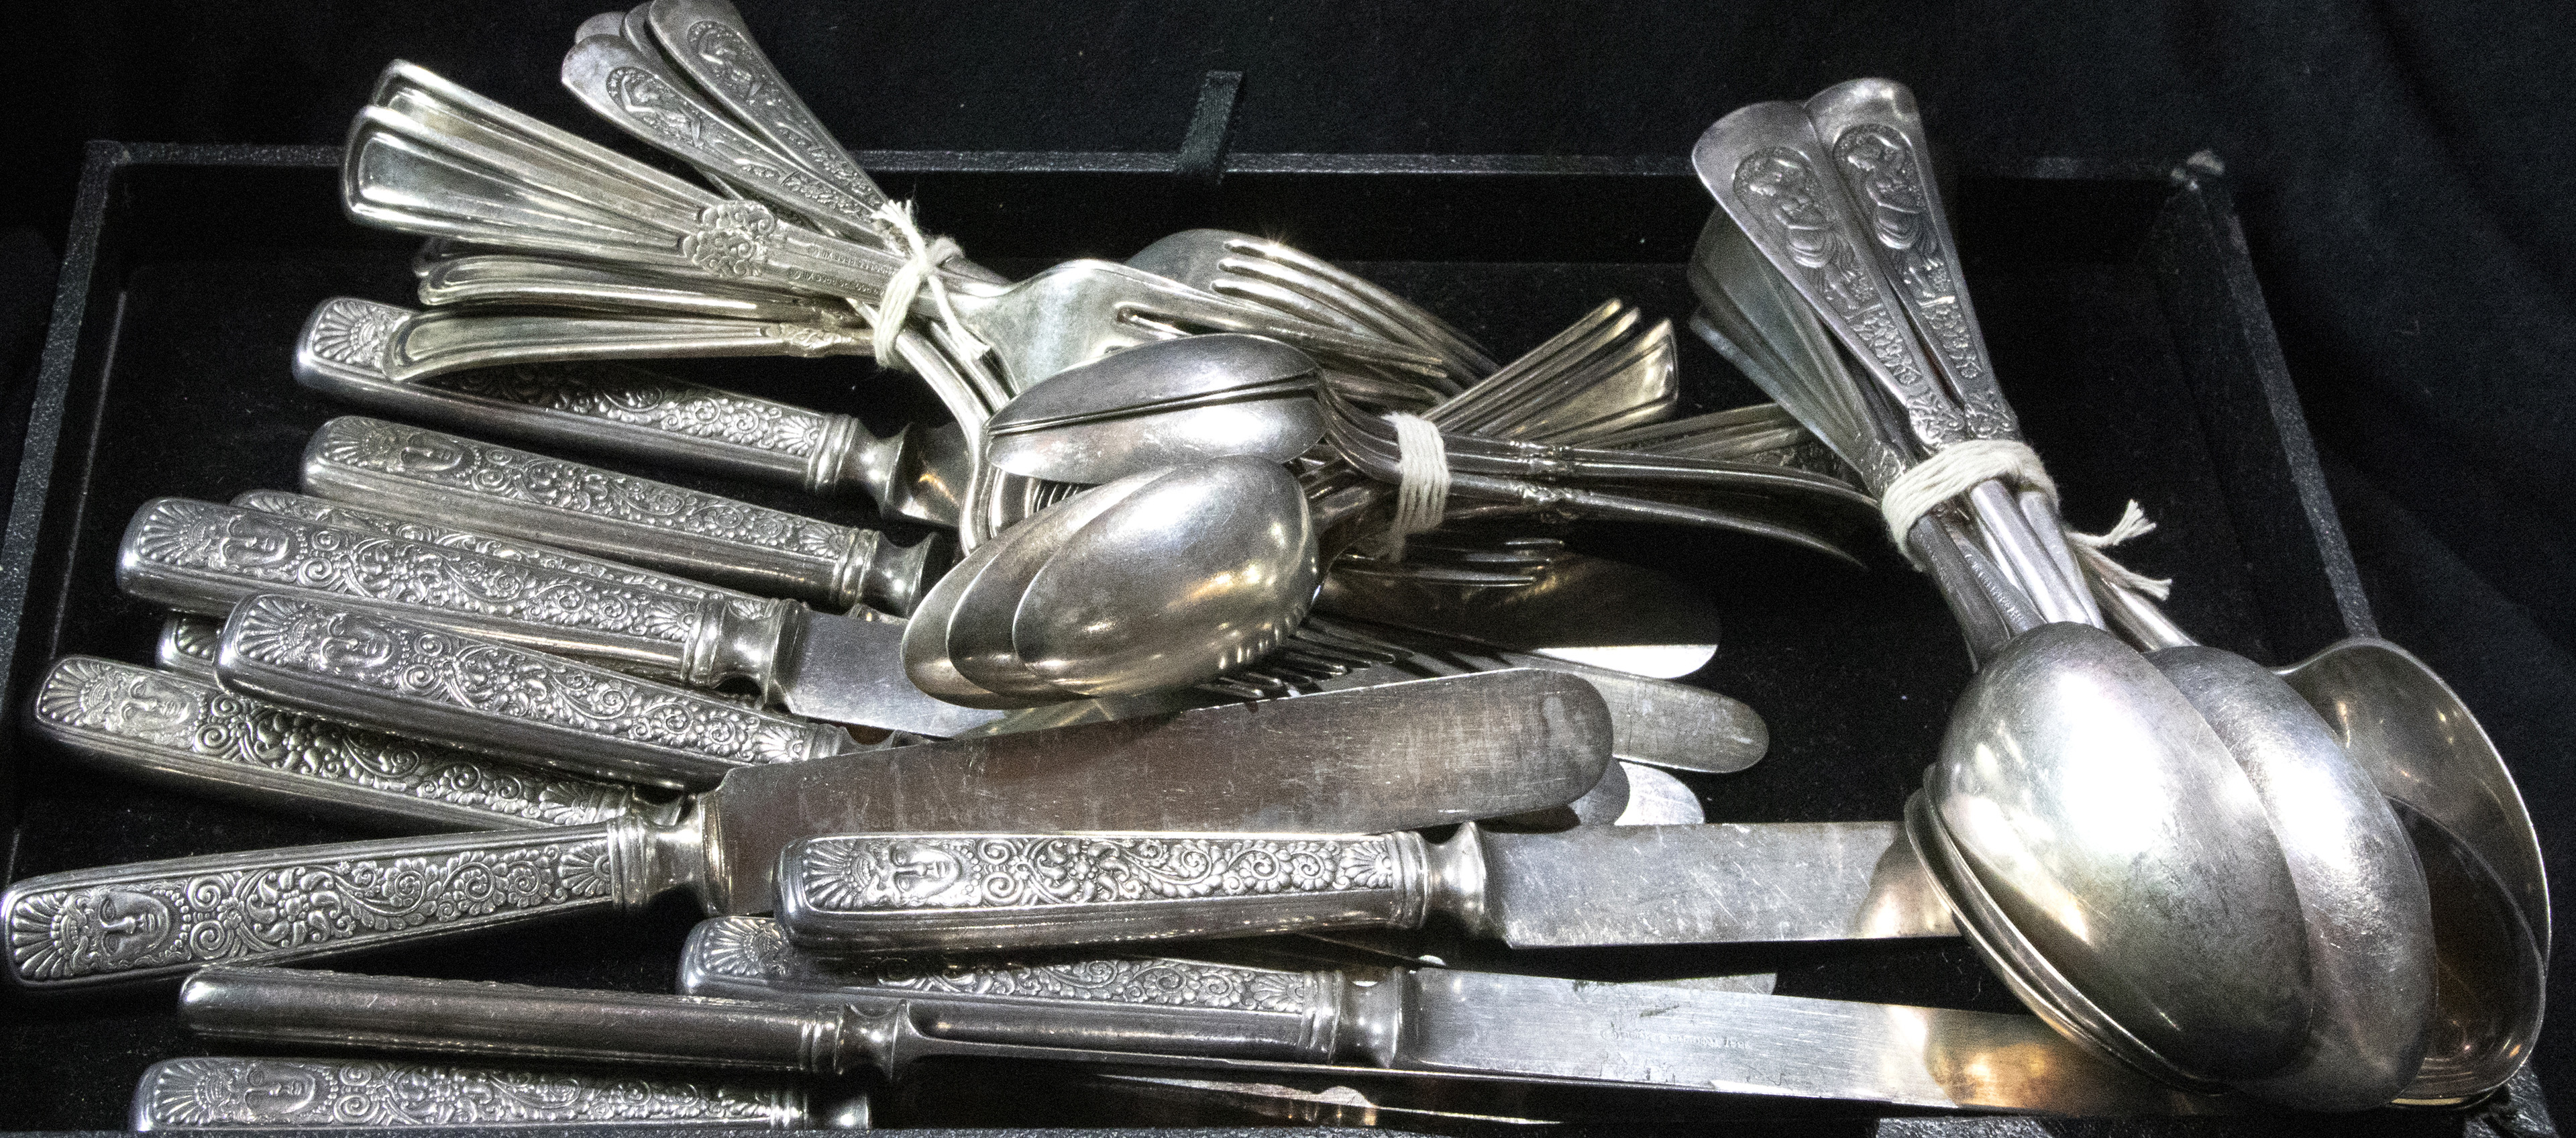 A COLLECTION OF 1847 ROGERS SILVER PLATE